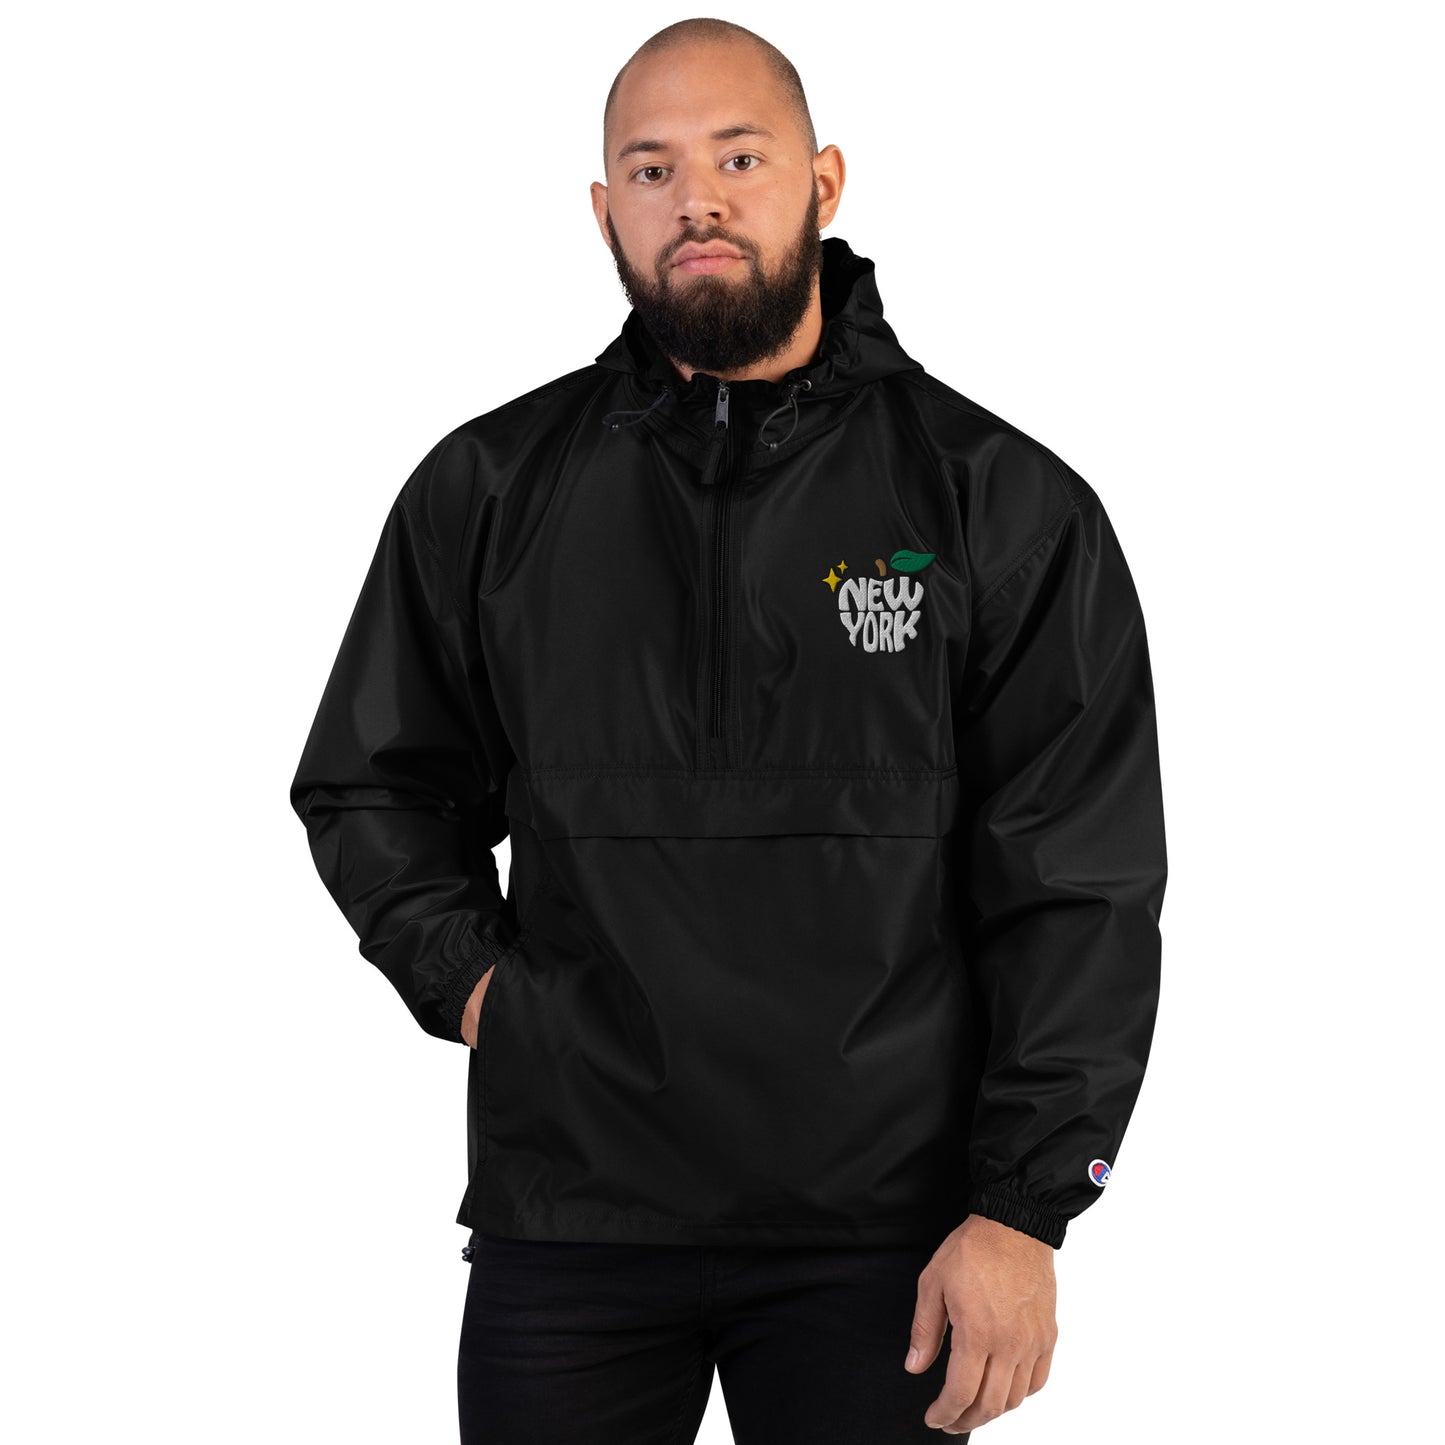 New York Apple Logo Embroidered Champion Packable Jacket